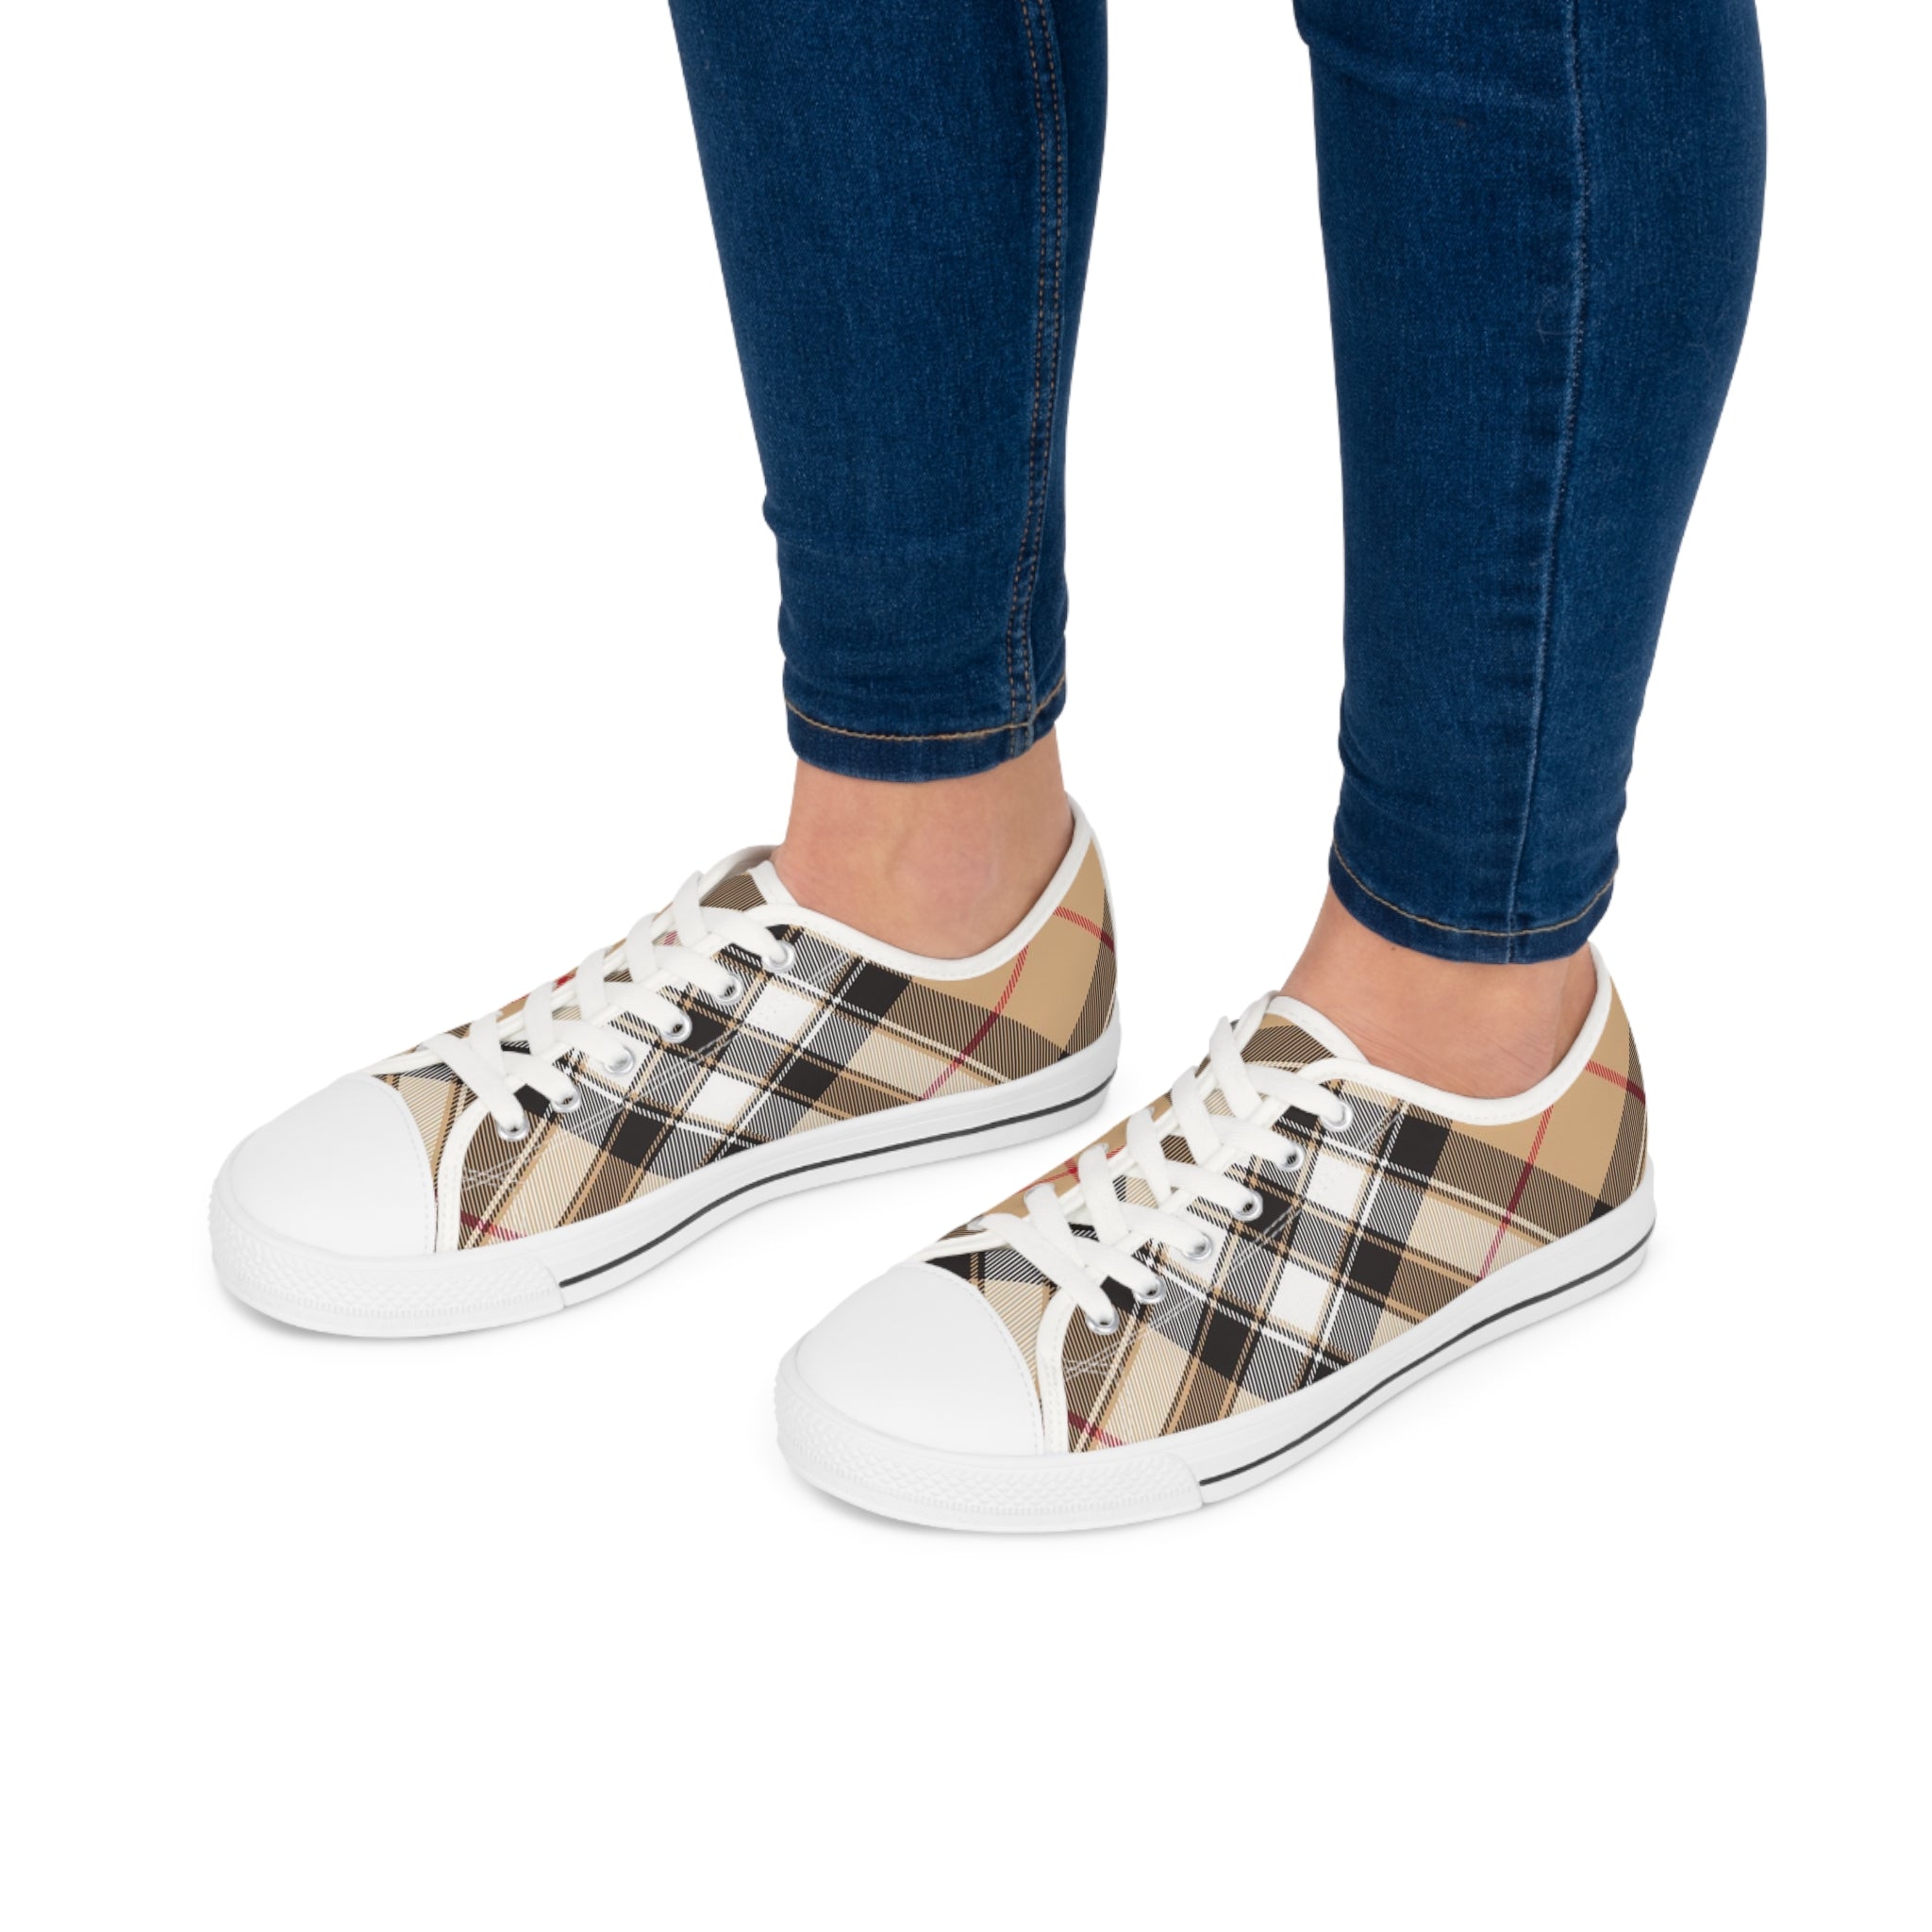 Groove Fashion Collection in Plaid (Red Stripe) Large Print Women's White Canvas Shoes